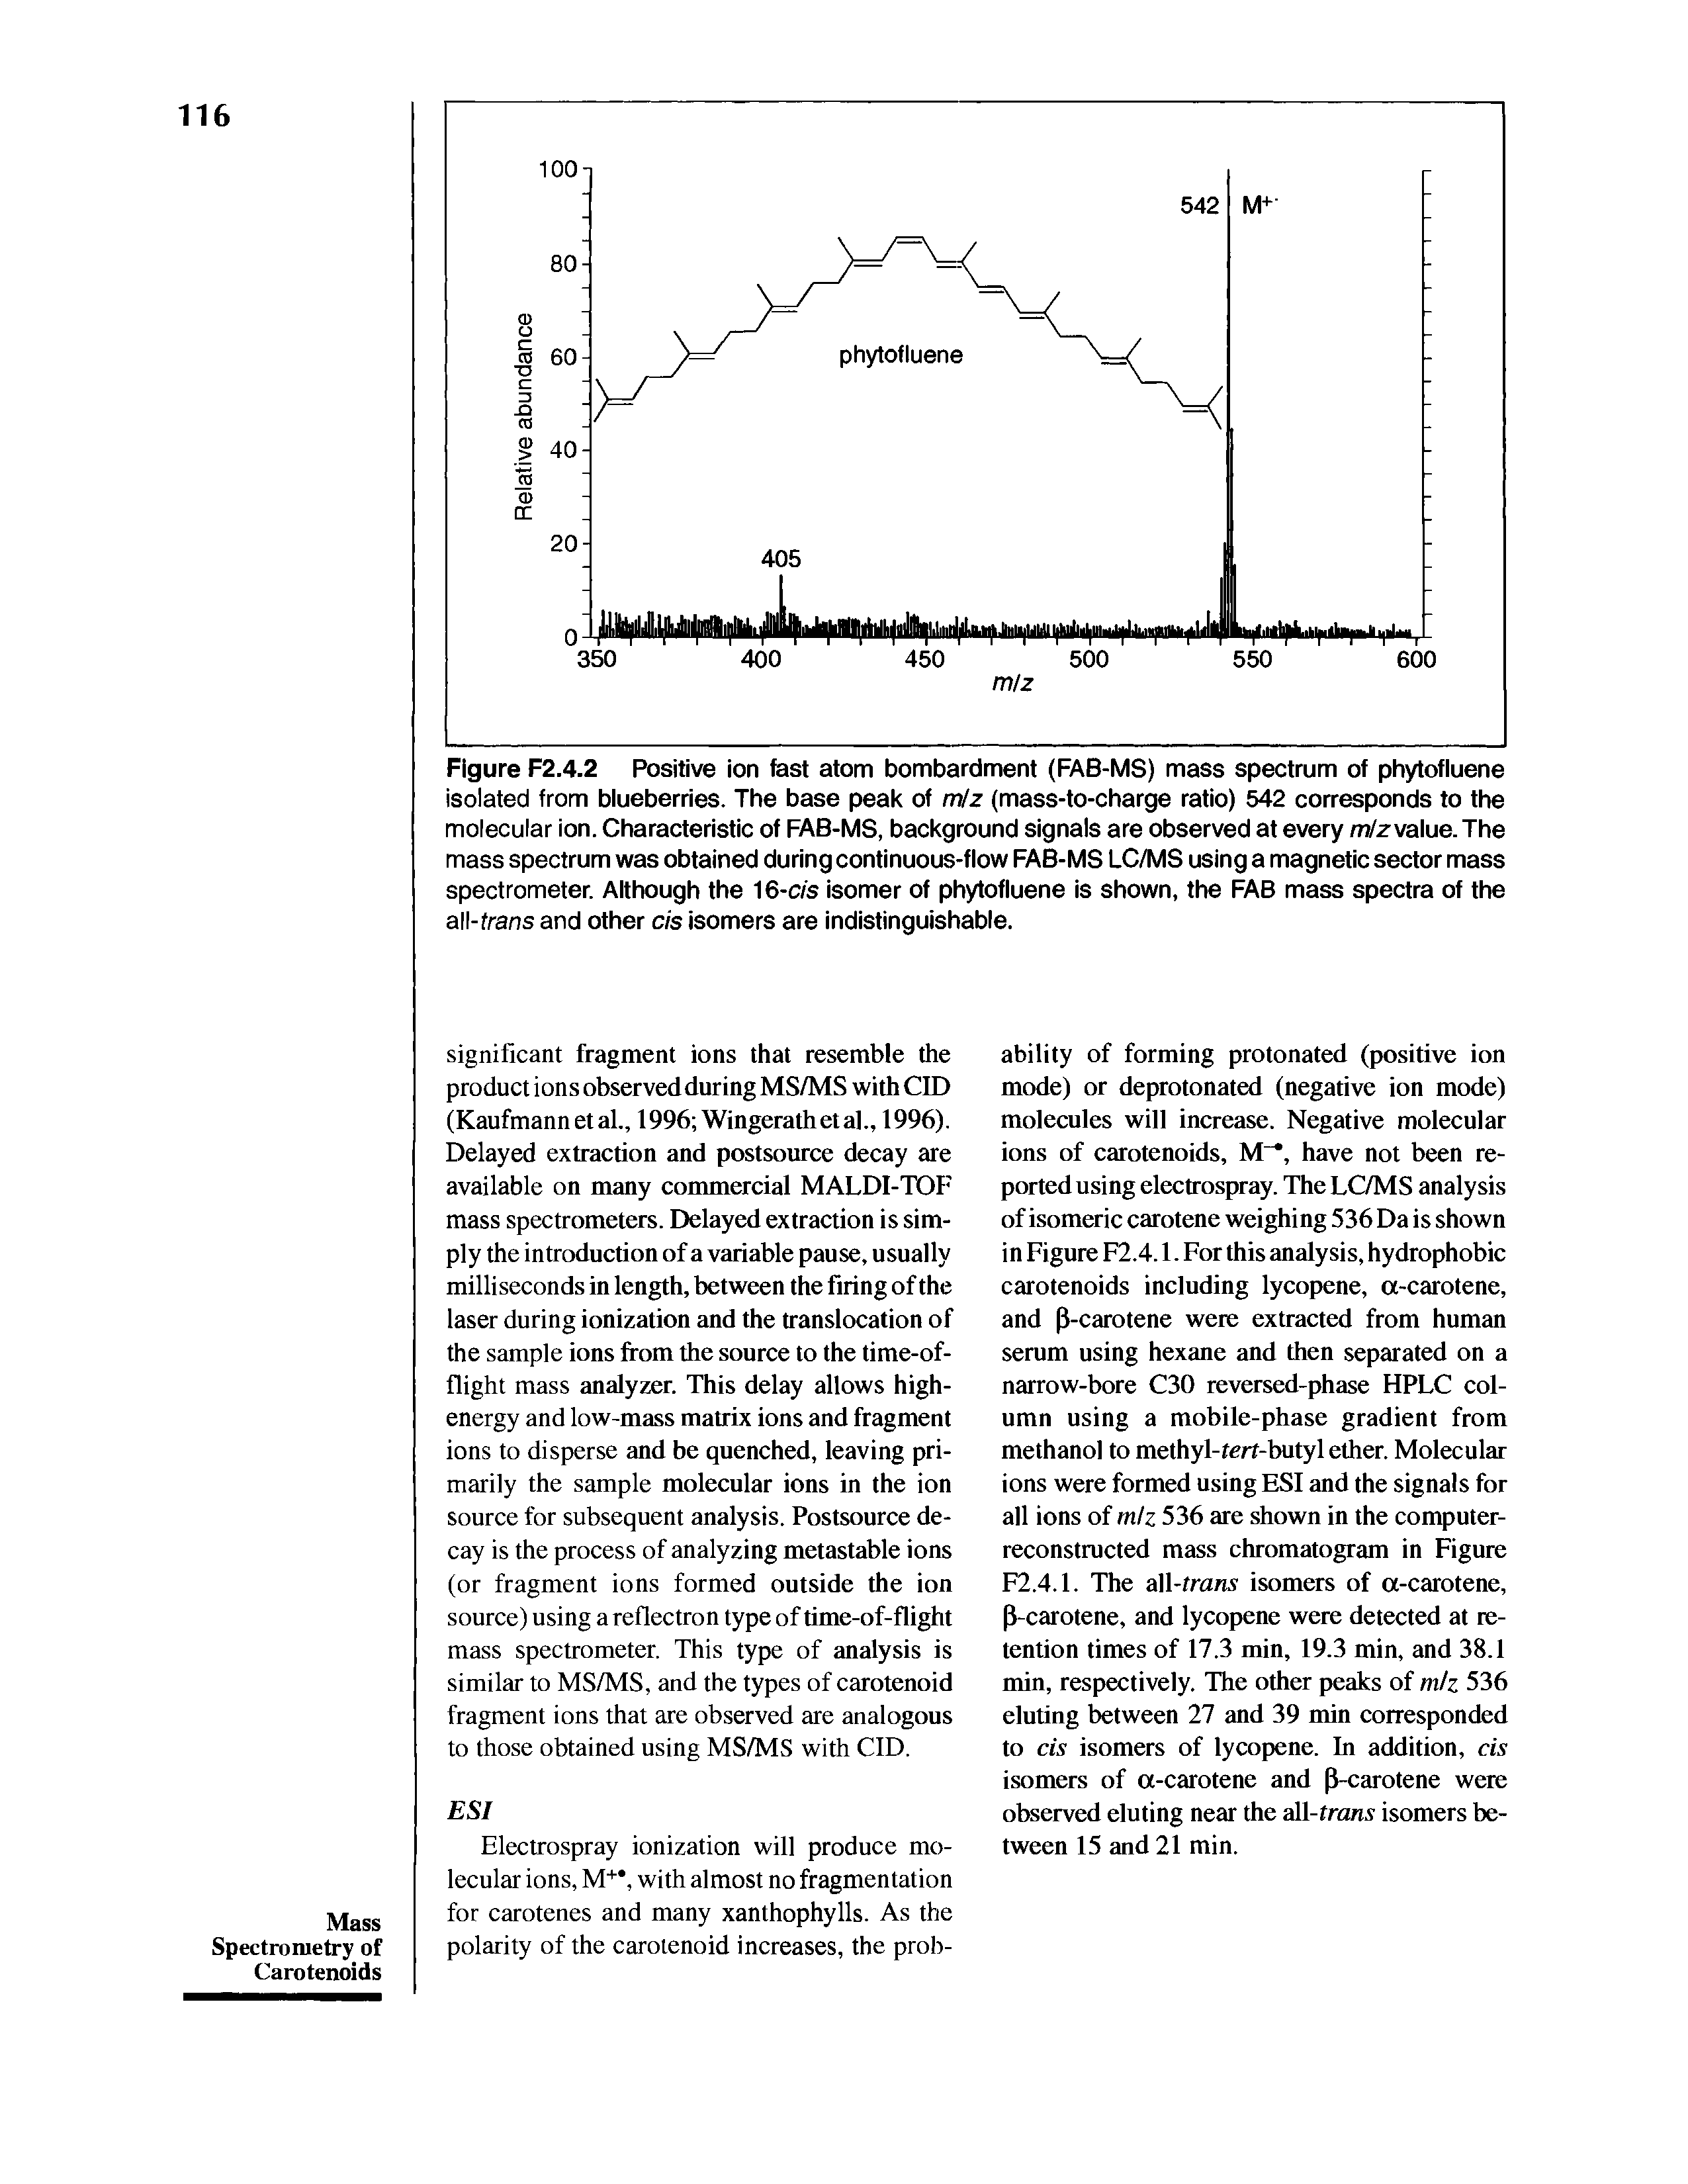 Figure F2.4.2 Positive ion fast atom bombardment (FAB-MS) mass spectrum of phytofluene isolated from blueberries. The base peak of mlz (mass-to-charge ratio) 542 corresponds to the molecular ion. Characteristic of FAB-MS, background signals are observed at every mlz value. The mass spectrum was obtained during continuous-flow FAB-MS LC/MS using a magnetic sector mass spectrometer. Although the 16-c/s isomer of phytofluene is shown, the FAB mass spectra of the all- trans and other cis isomers are indistinguishable.